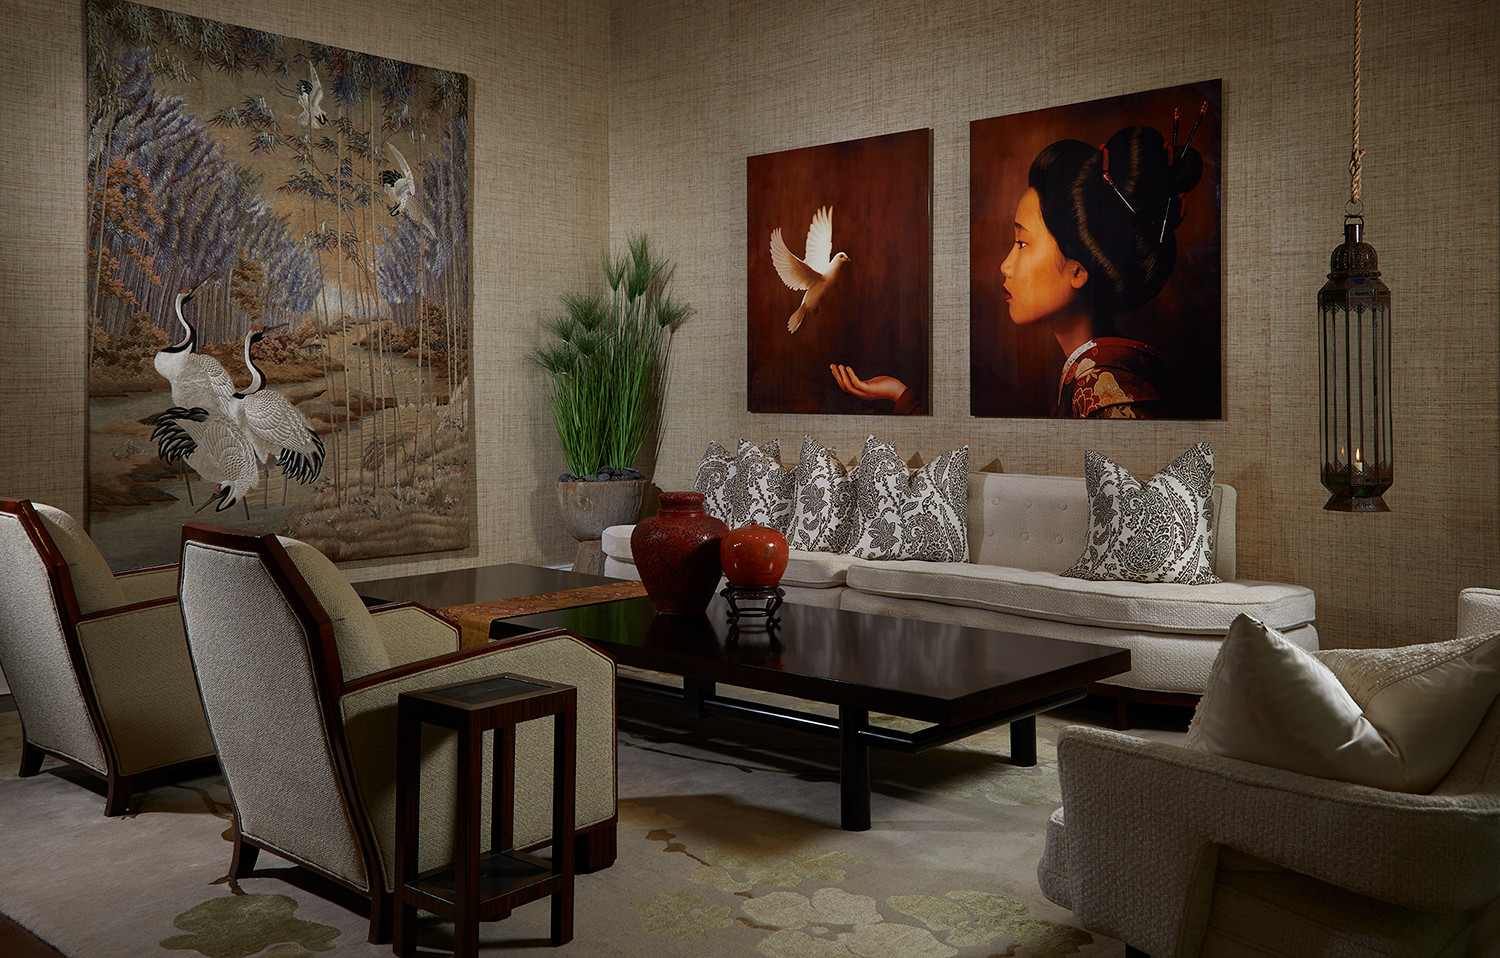 75 Beautiful Asian Home Design Pictures Ideas December 2020 Houzz